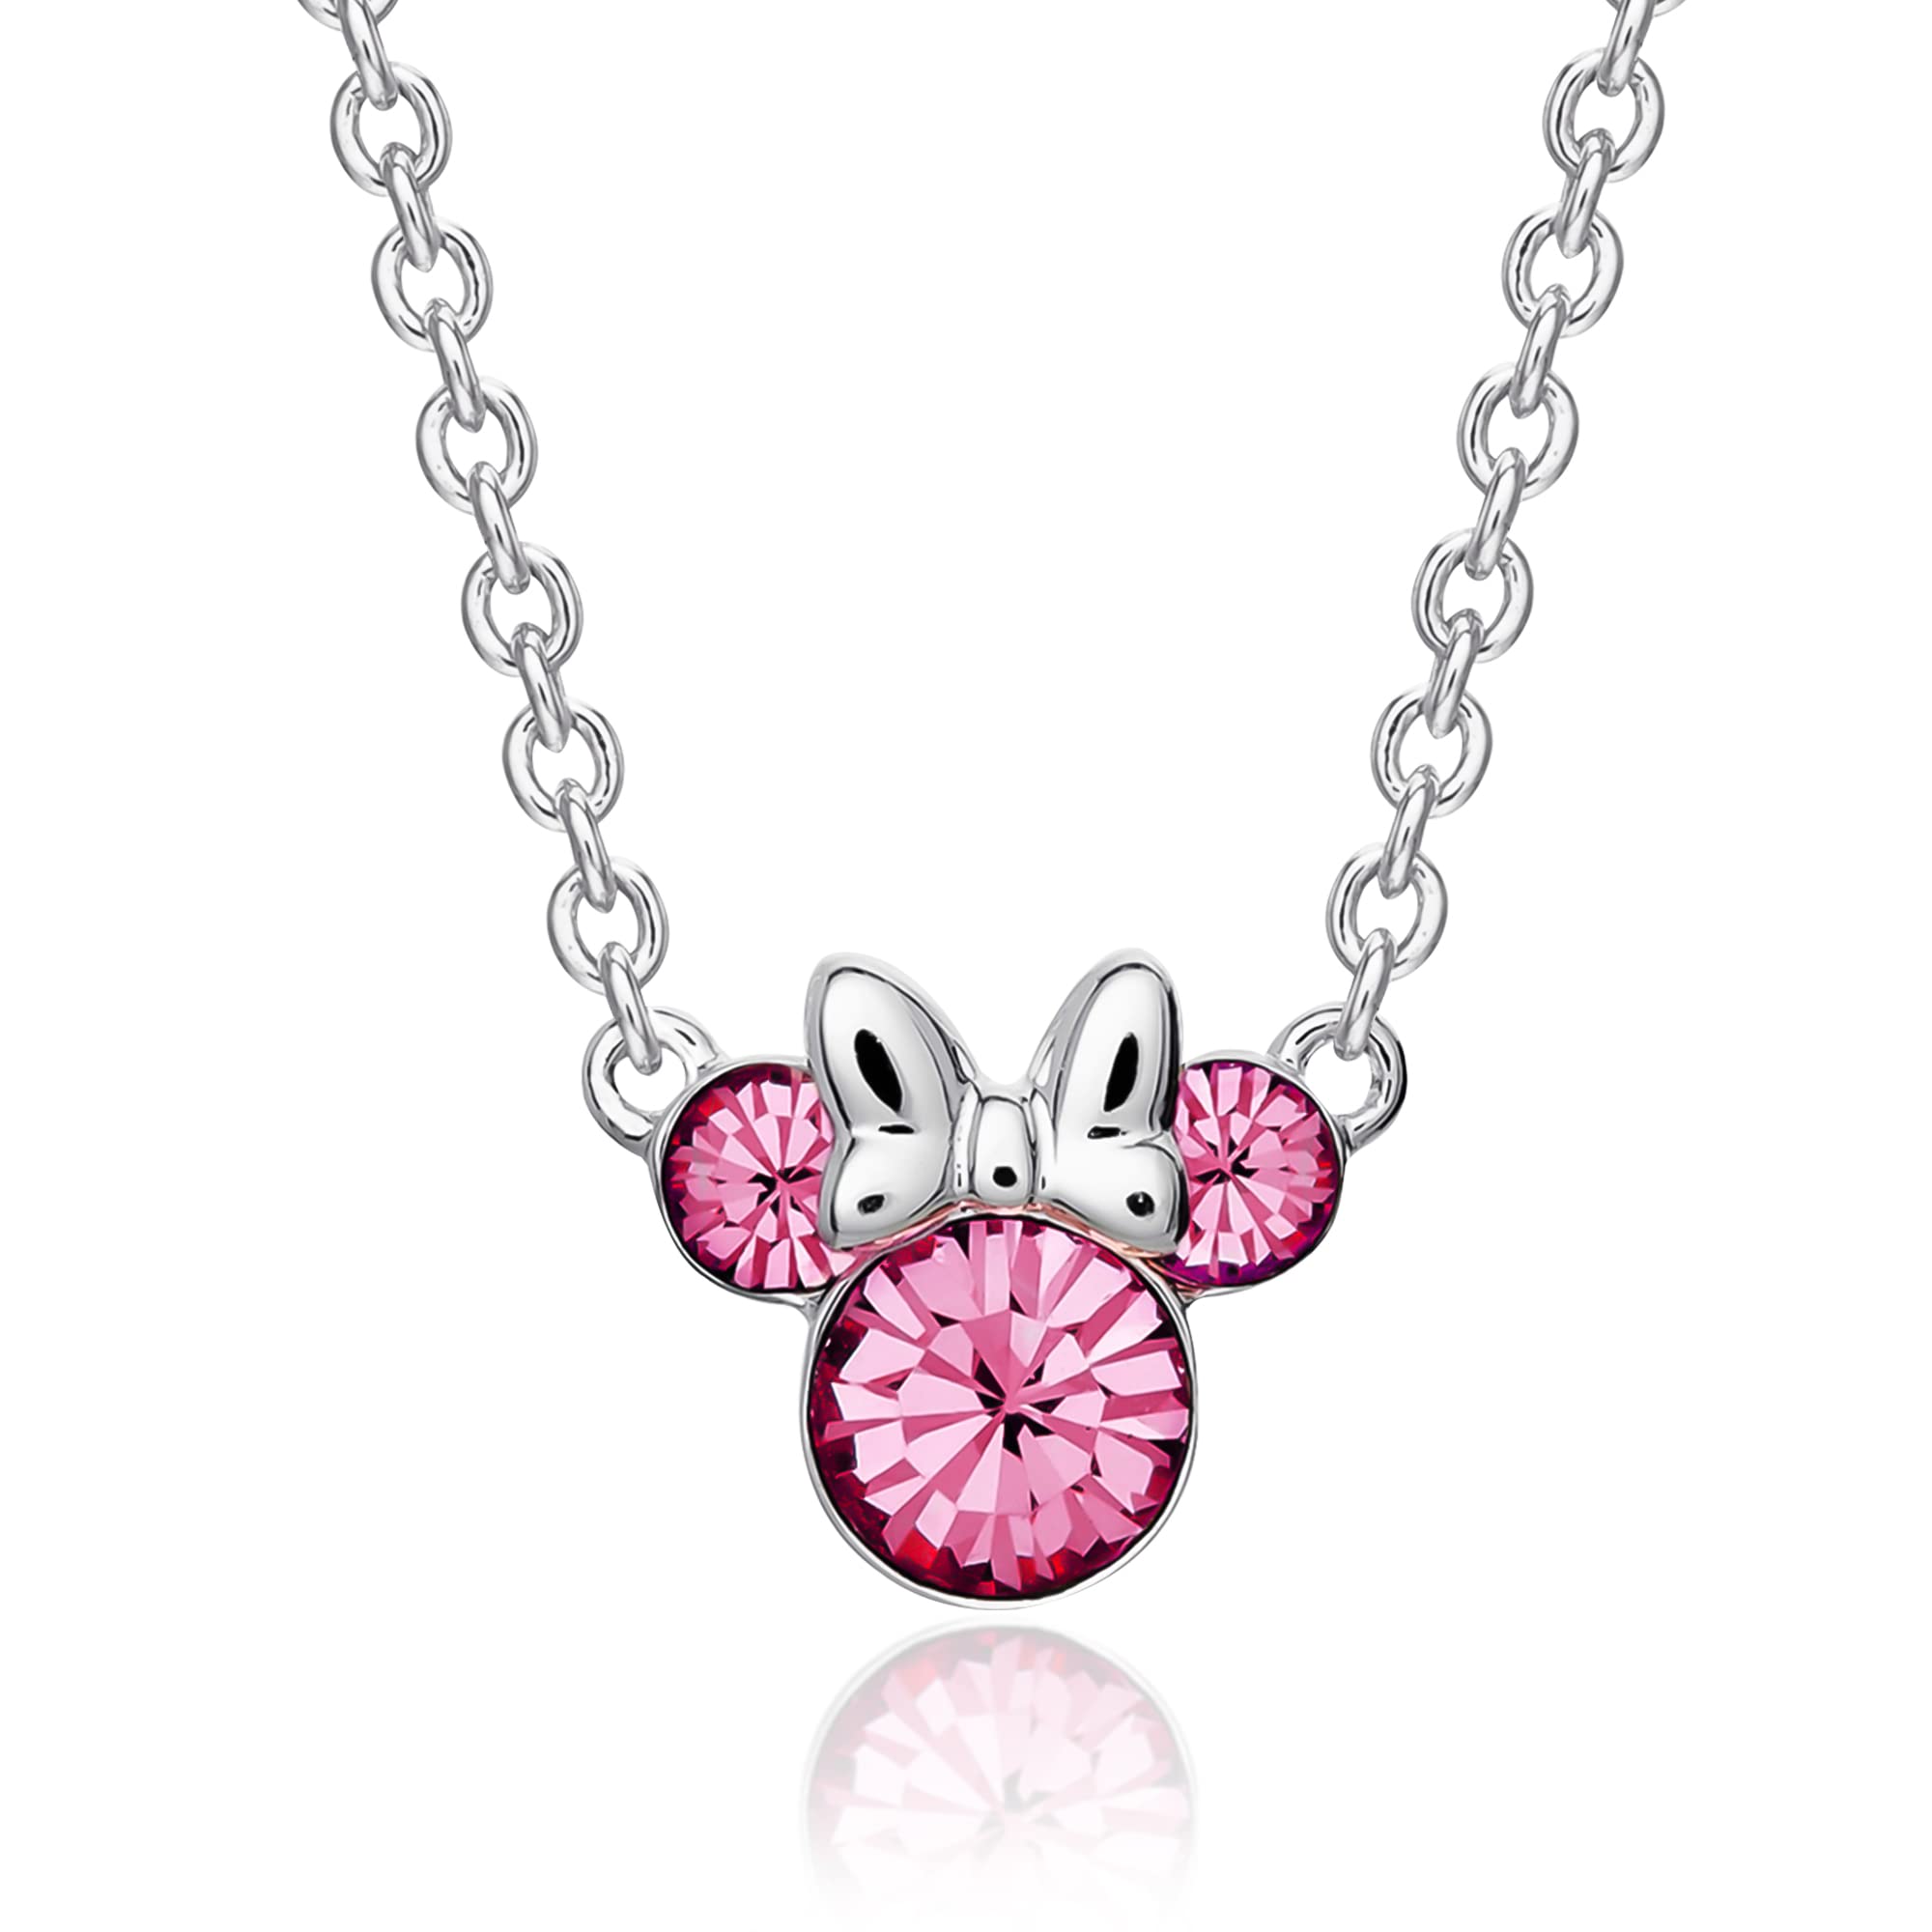 Disney Minnie Mouse Silver Plated Birthstone Month Pendant Necklace